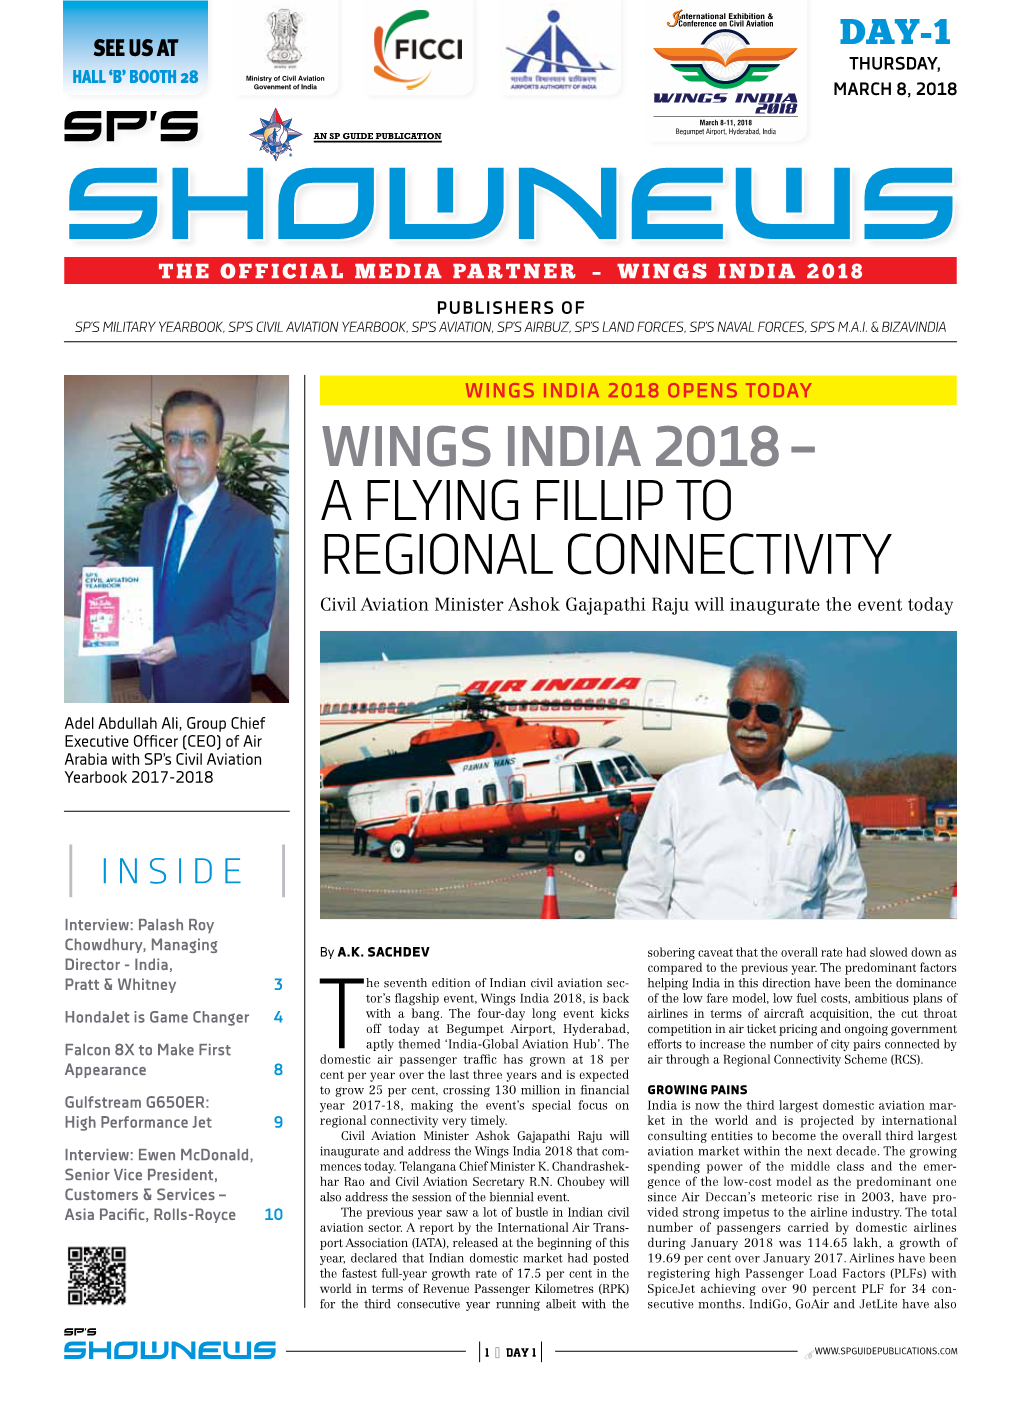 Wings India 2018